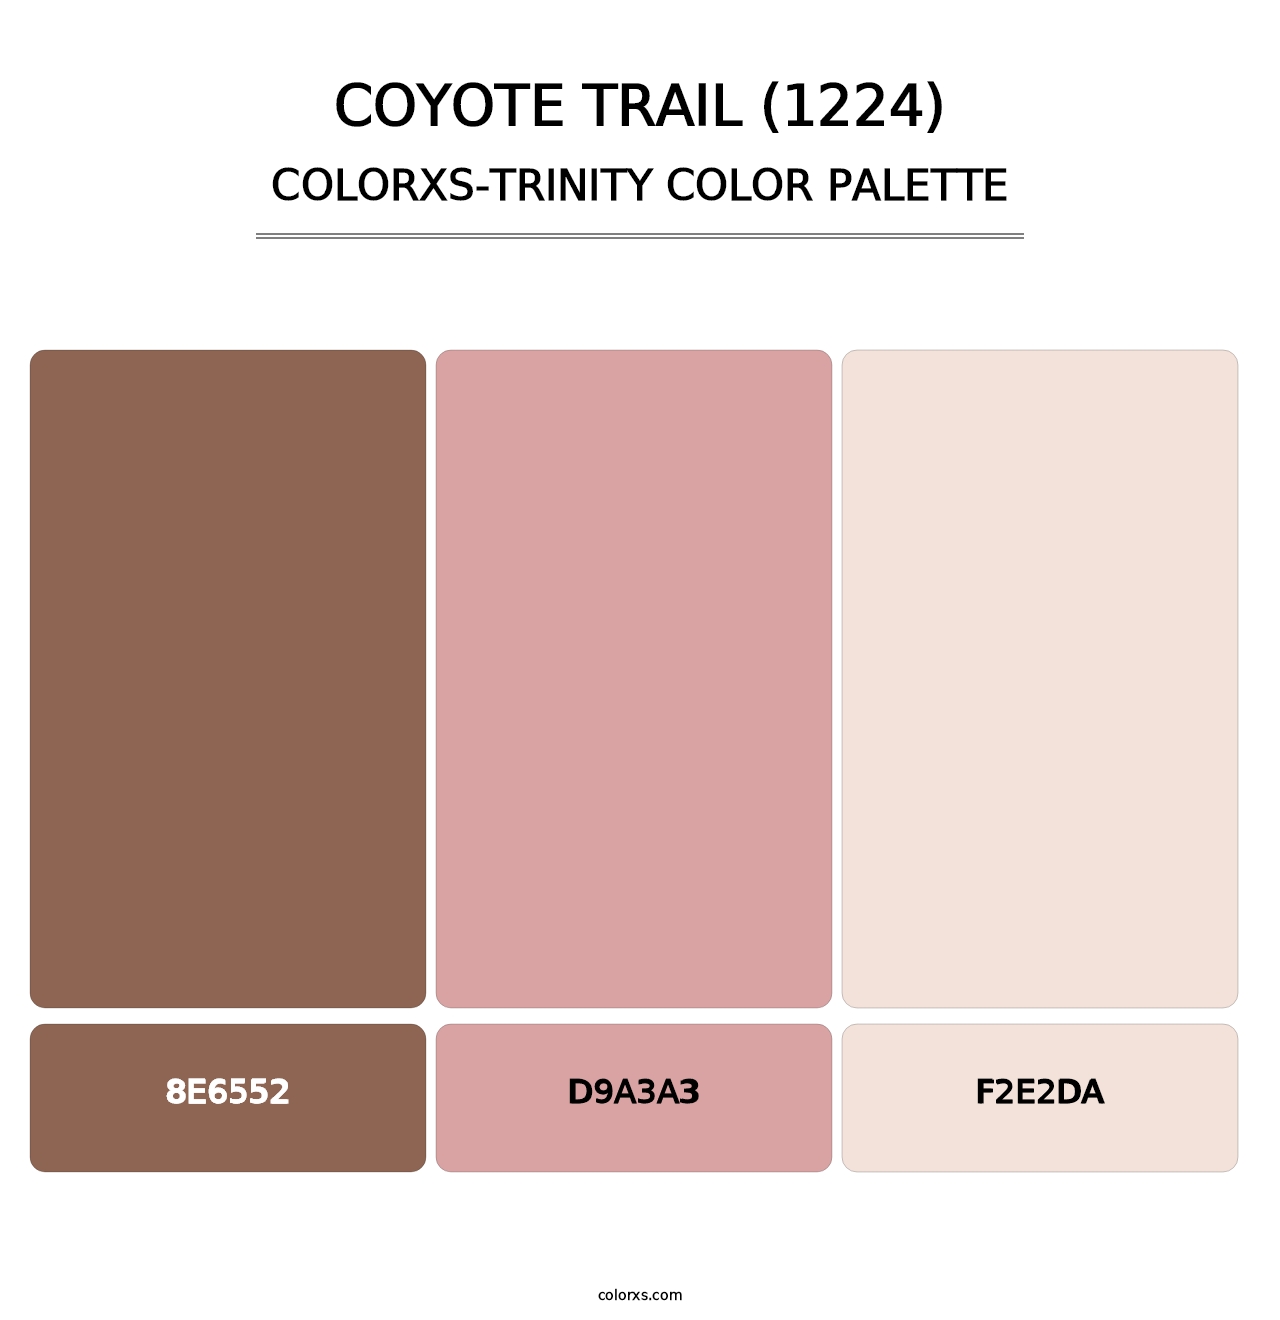 Coyote Trail (1224) - Colorxs Trinity Palette